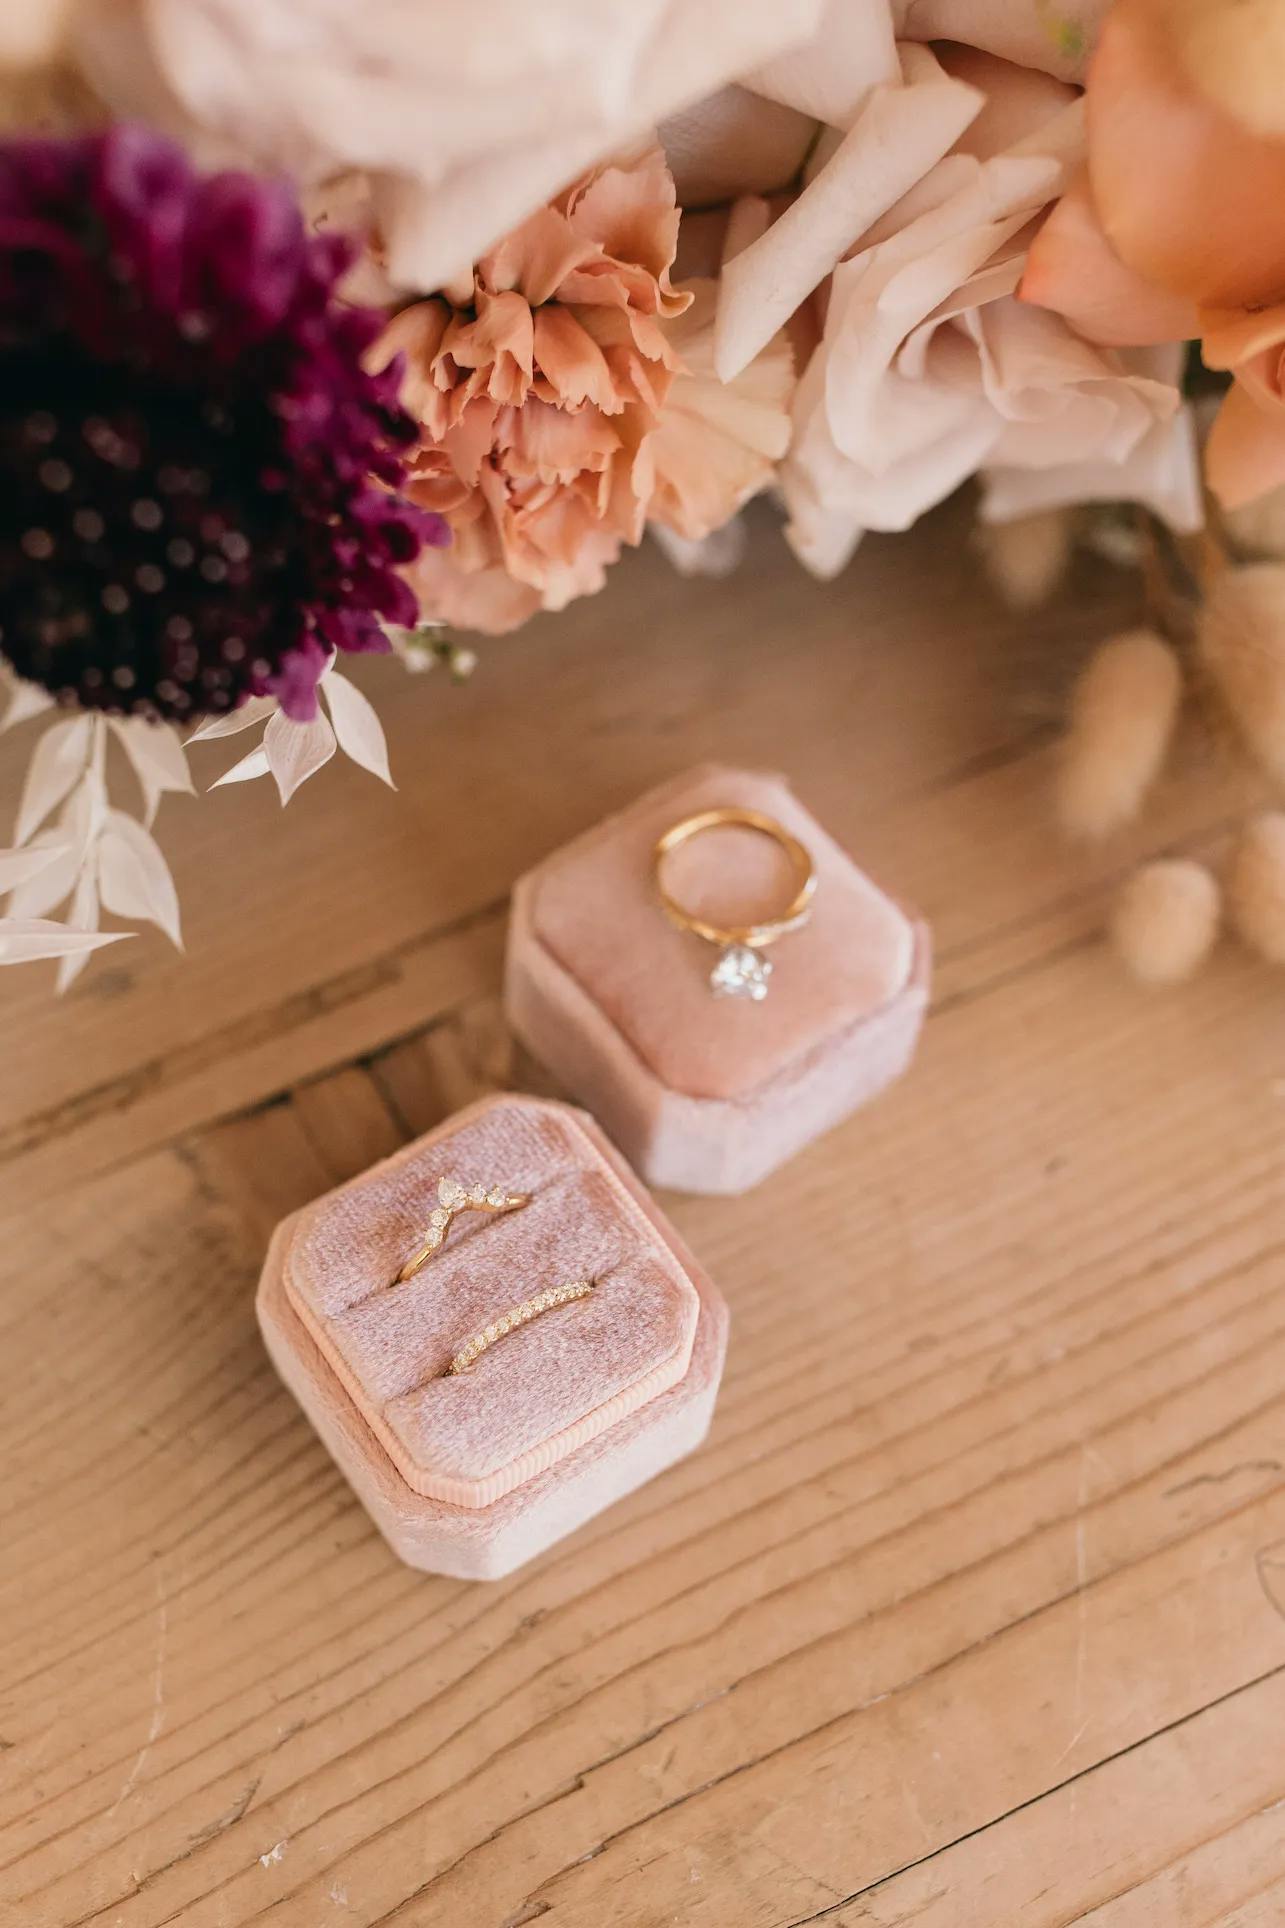 A wooden table holds two light pink velvet ring boxes. One box displays a gold ring with a single diamond, while the other shows two delicate gold rings. Above the boxes, a bouquet of flowers in shades of pink, peach, and dark purple is partially visible.